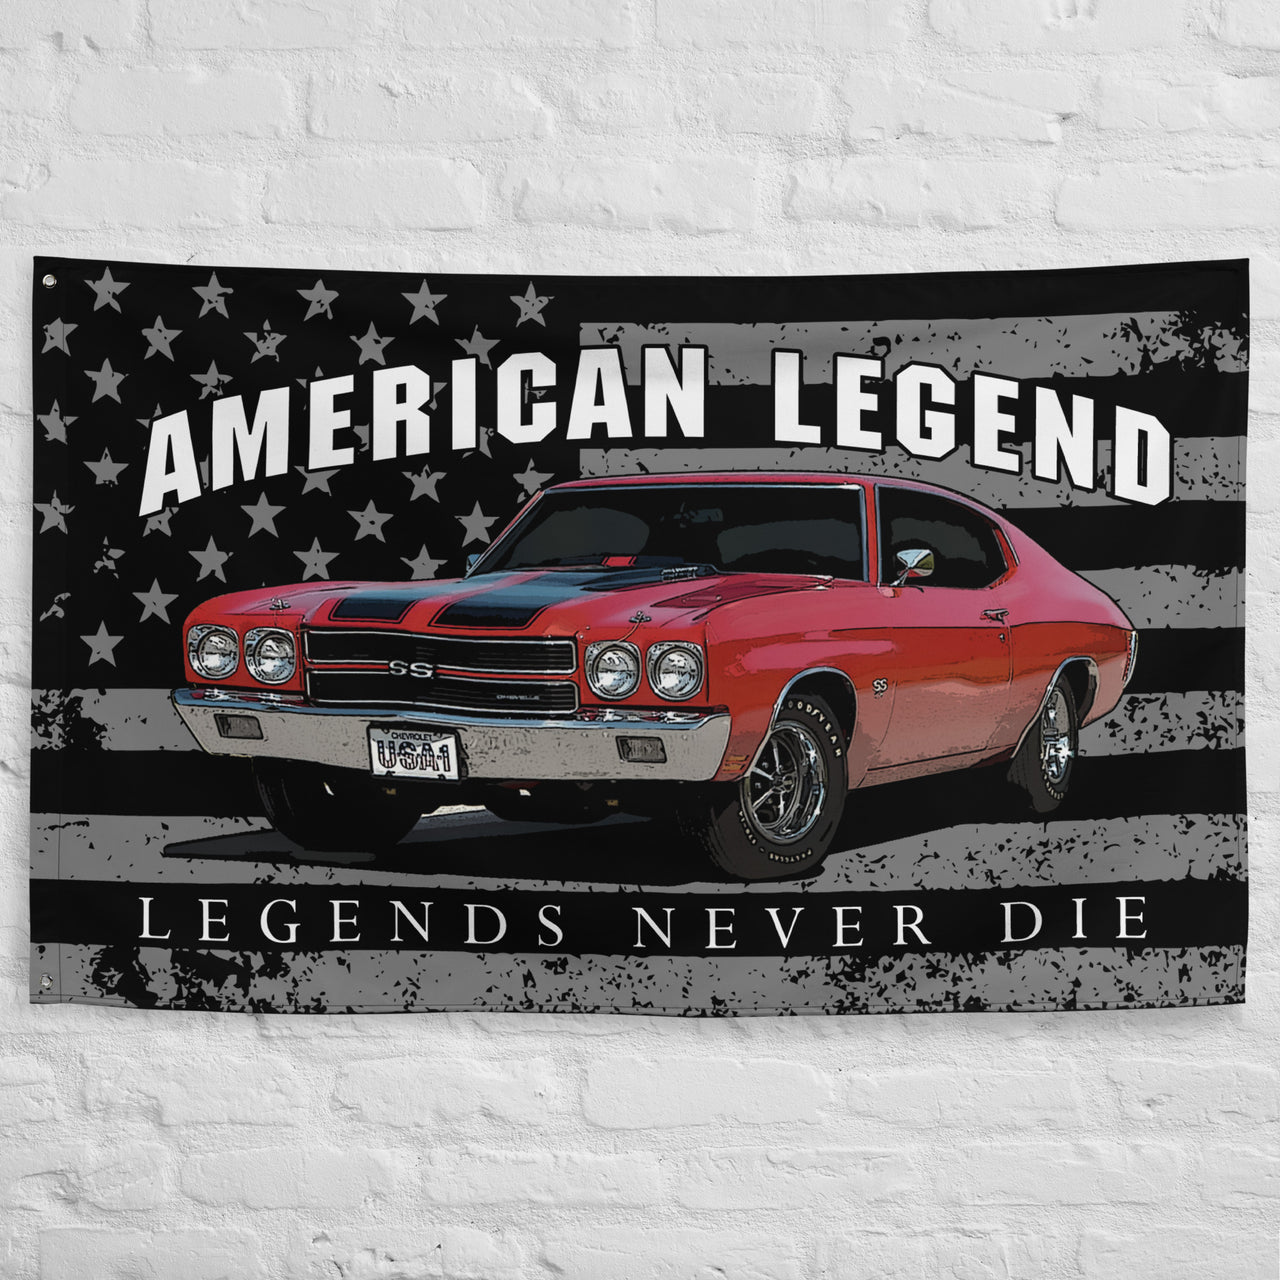 1970 Chevelle Garage Banner Wall Flag Hung on A Brick Wall